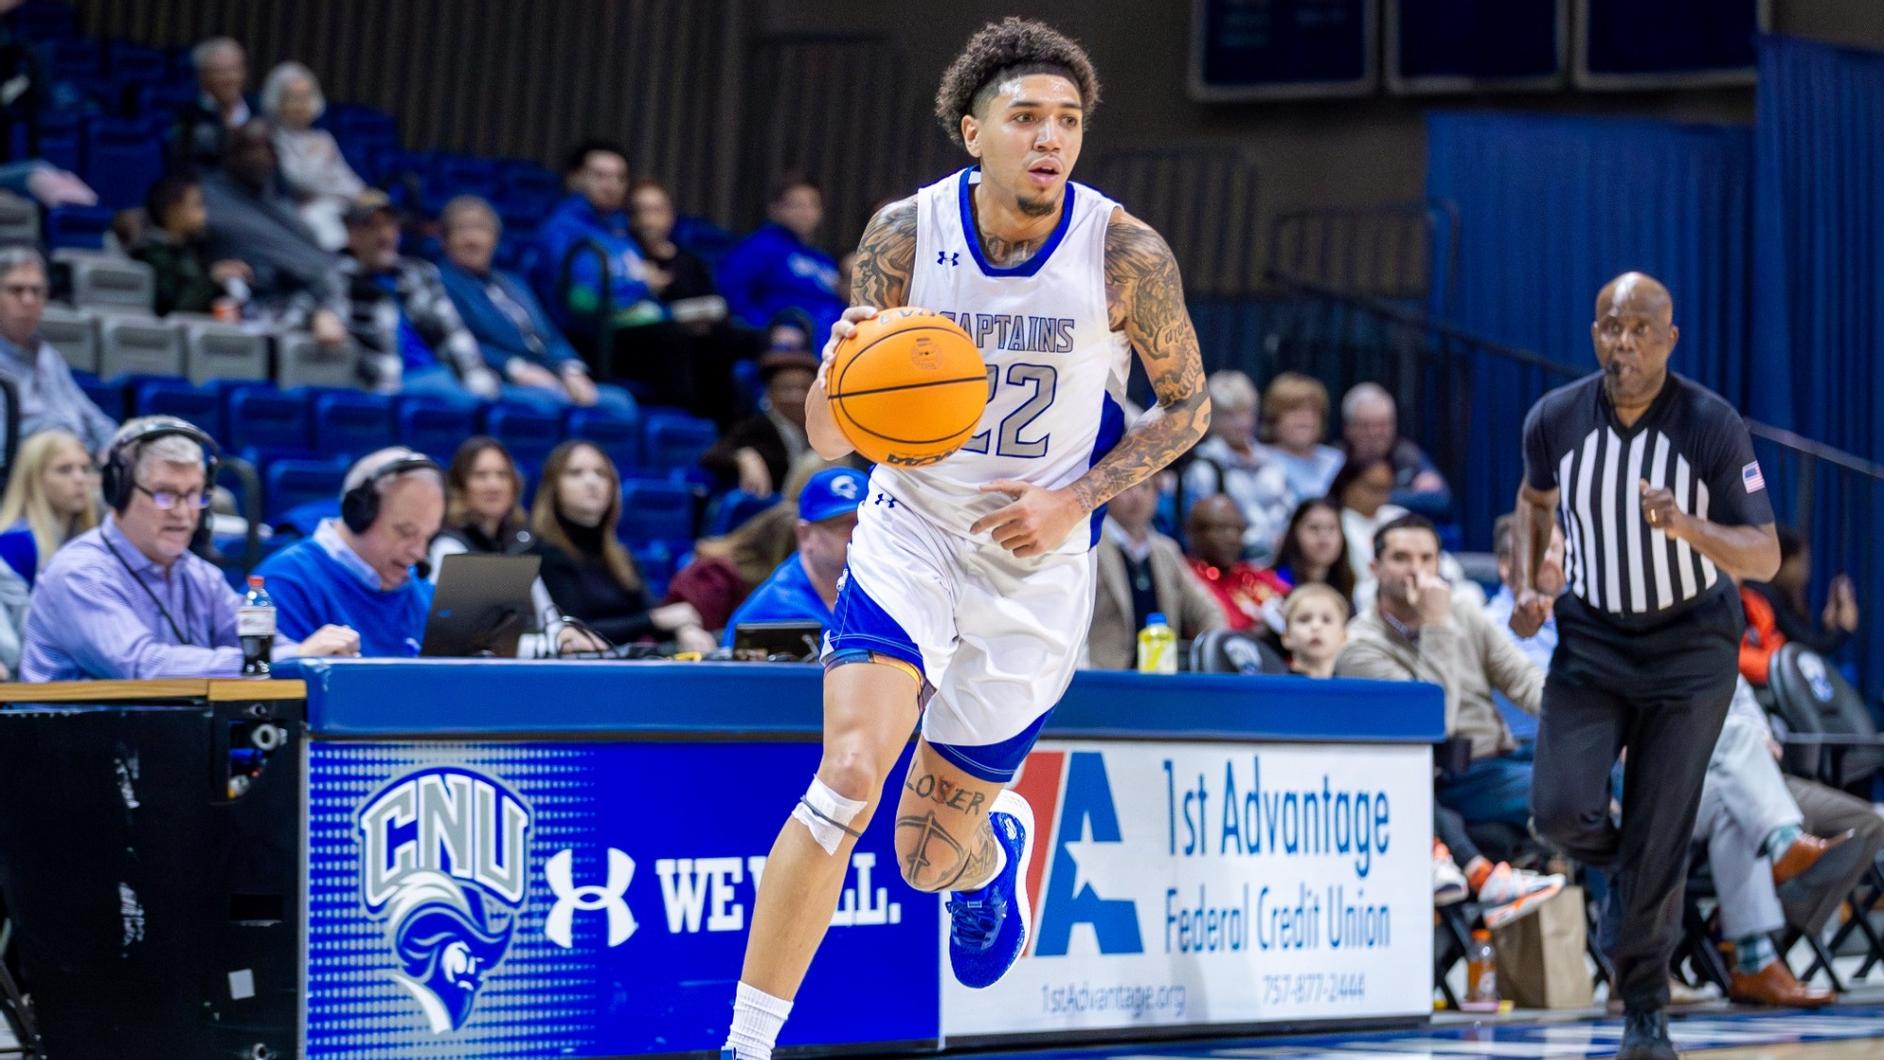 CNU's Jahn Hines Named First Team All-District by National Association of Basketball Coaches